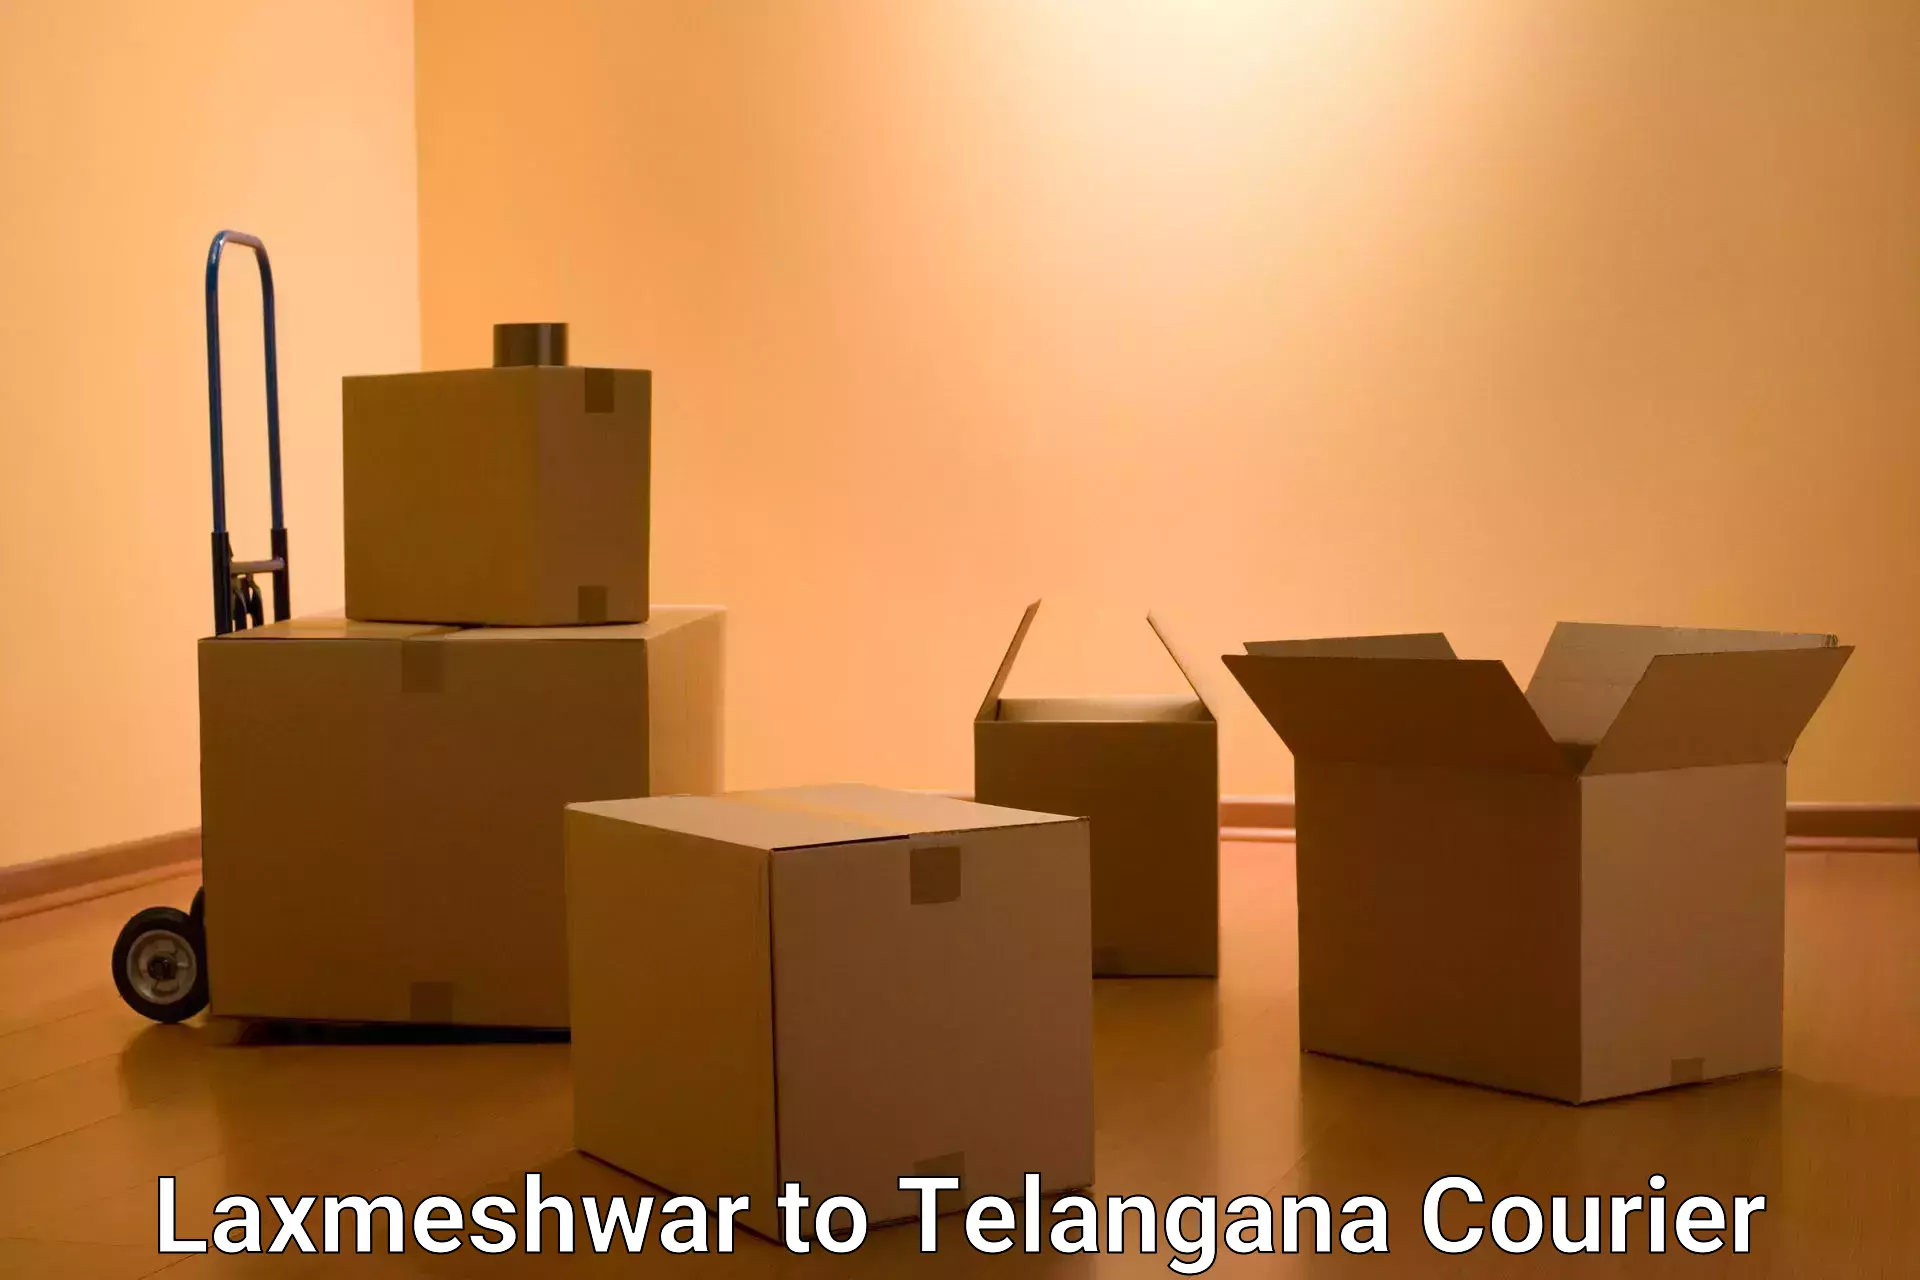 Reliable courier service in Laxmeshwar to Mogulla Pally